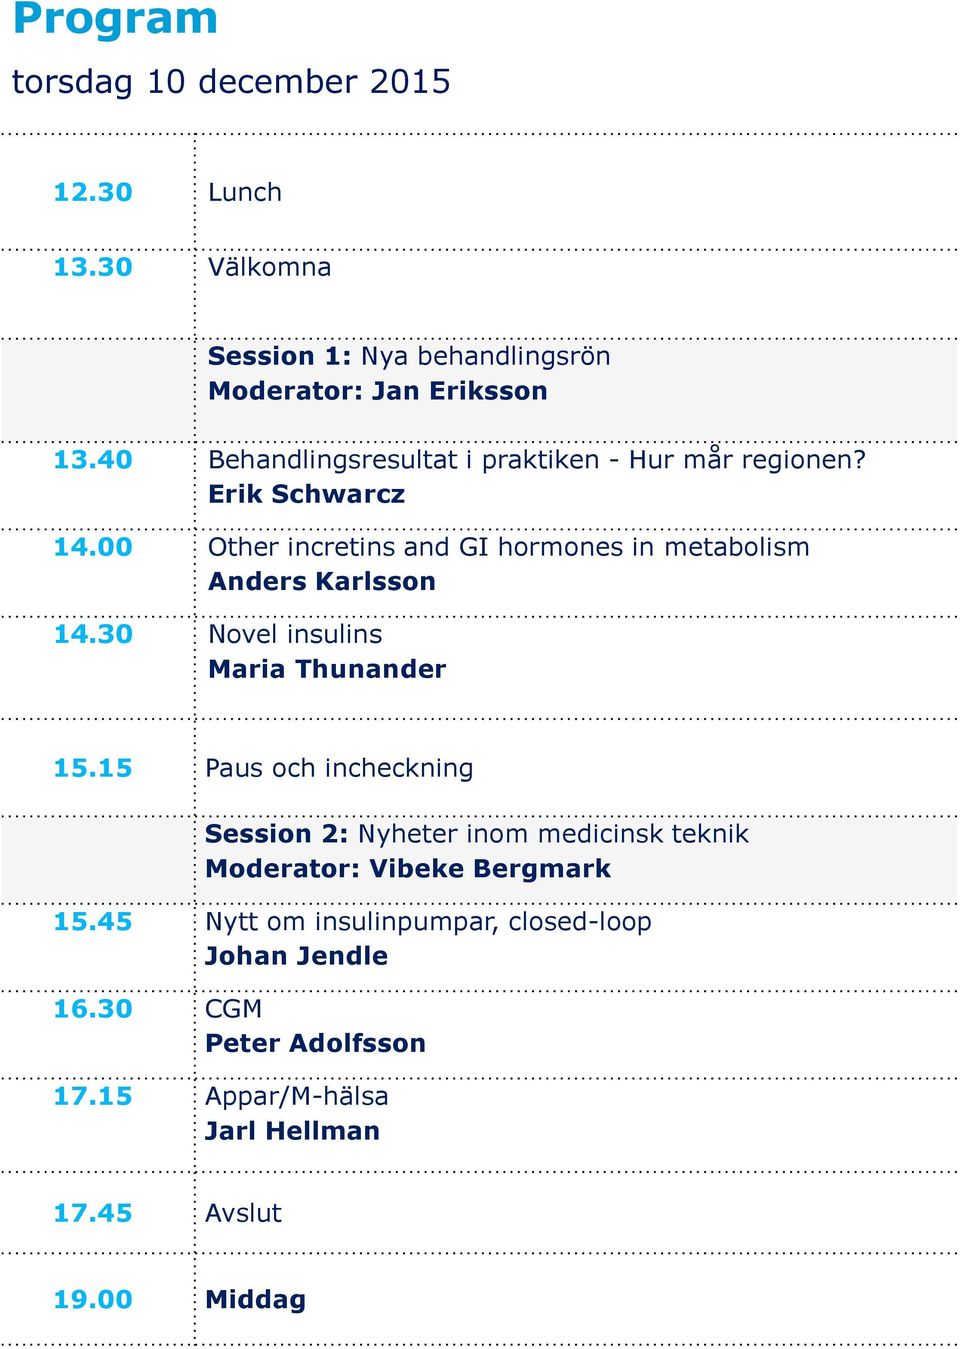 00 Other incretins and GI hormones in metabolism Anders Karlsson 14.30 Novel insulins Maria Thunander 15.